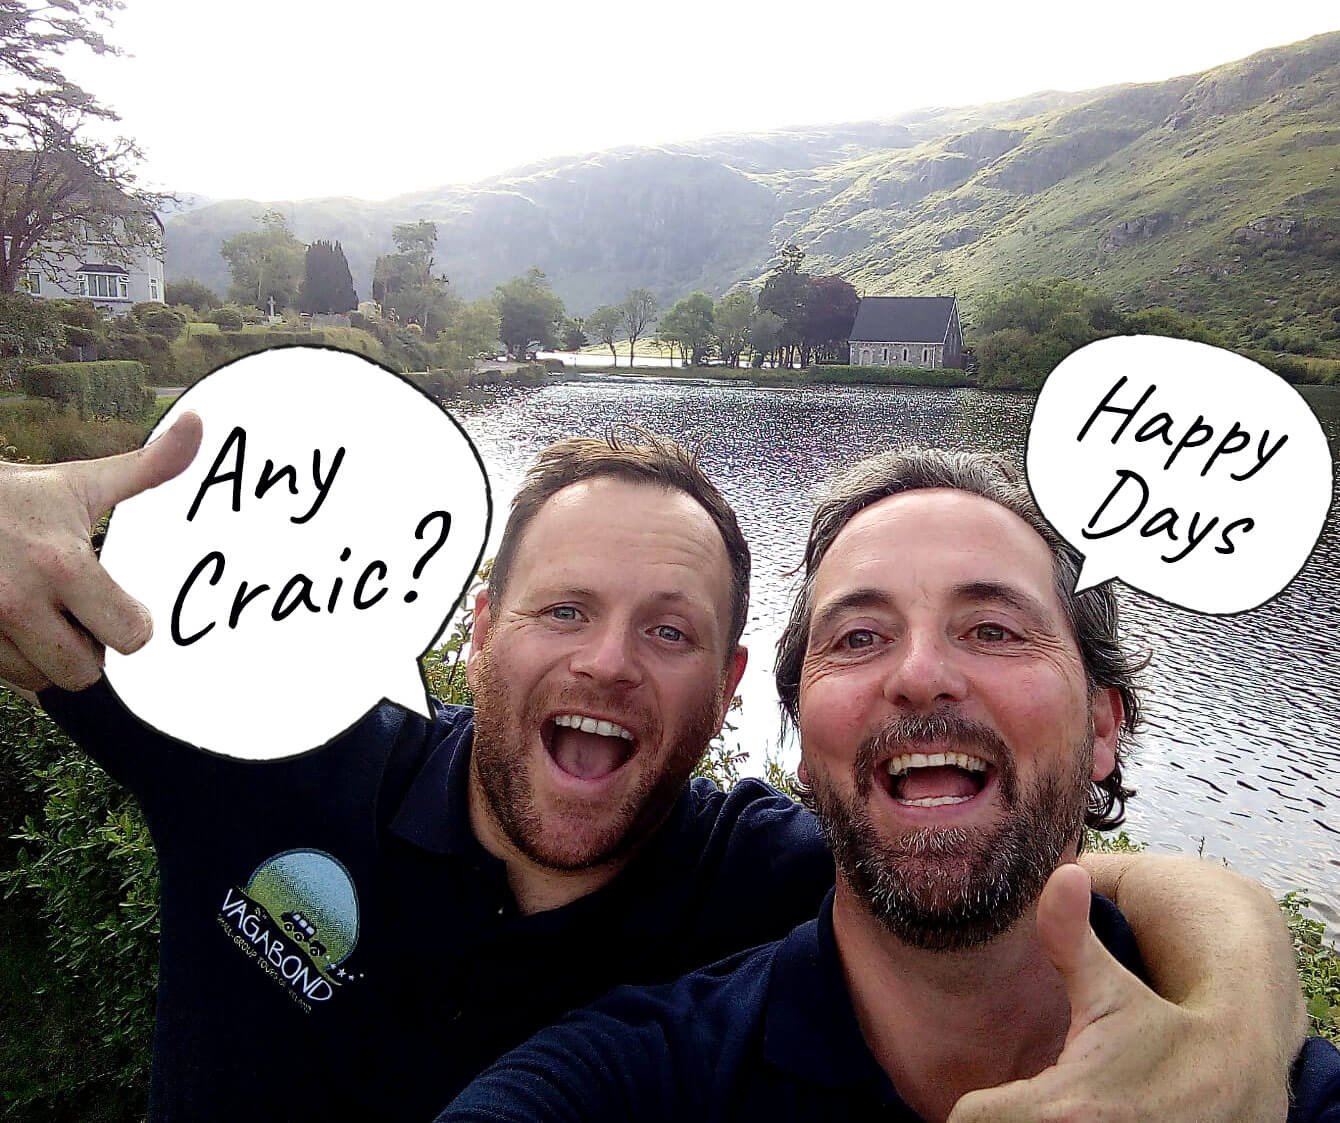 Two Ireland tour guides with speech bubbles